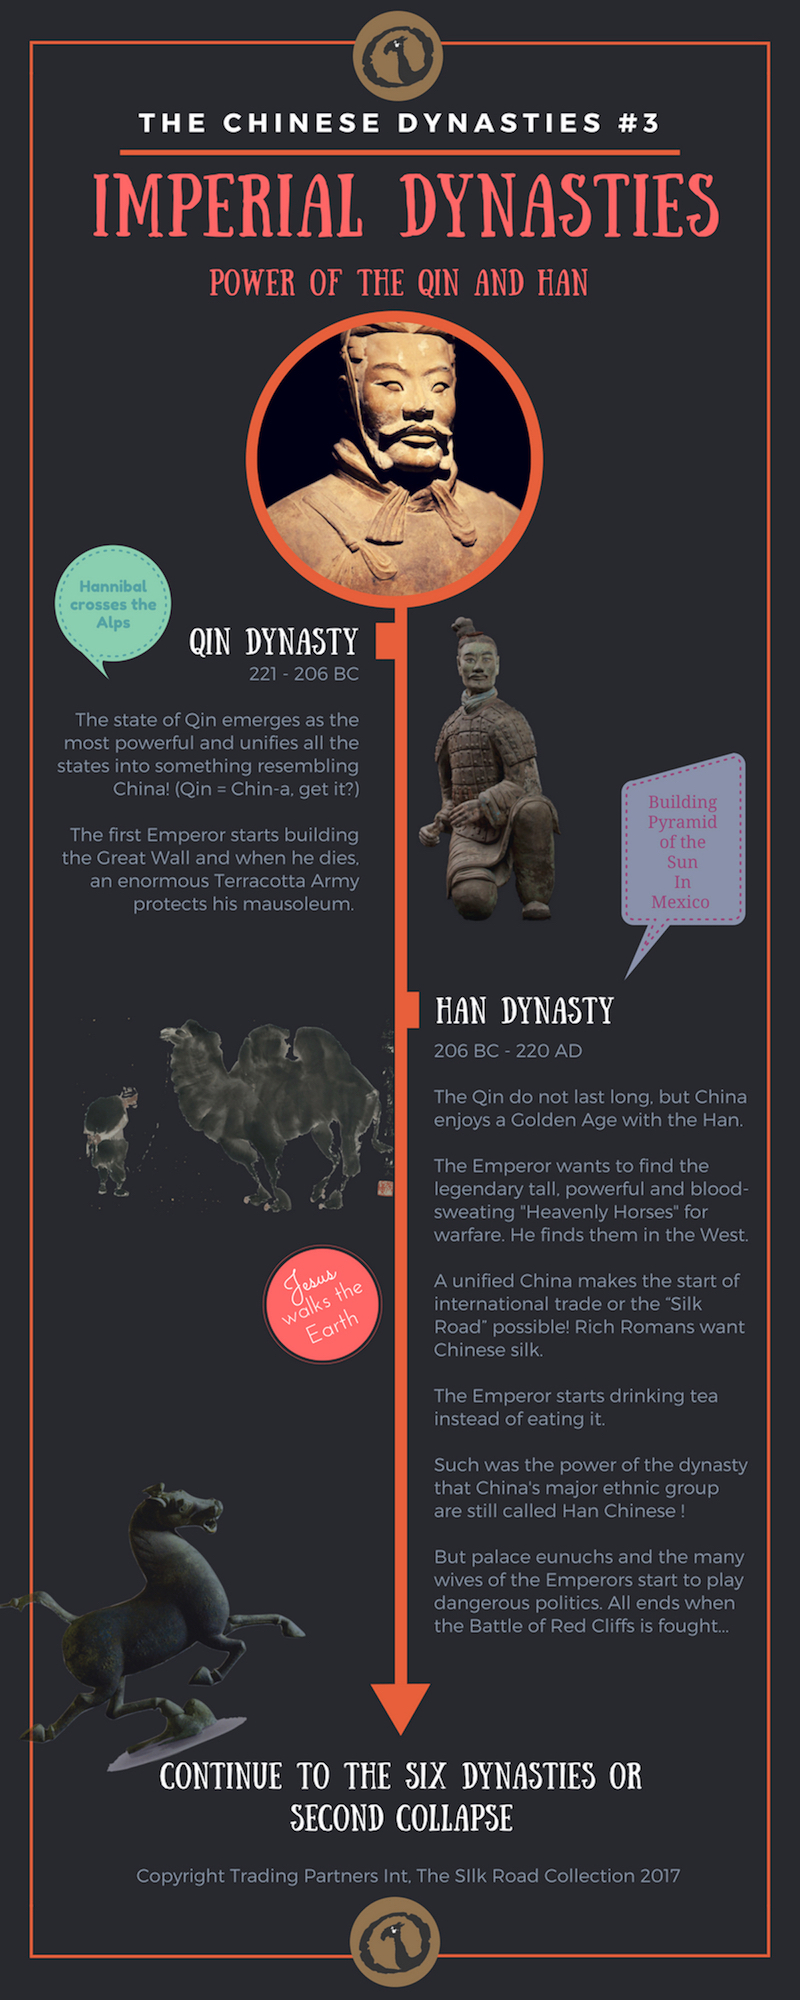 Timeline image of The Chinese Dynasties: Imperial Dynasties - Power of the Qin and Han